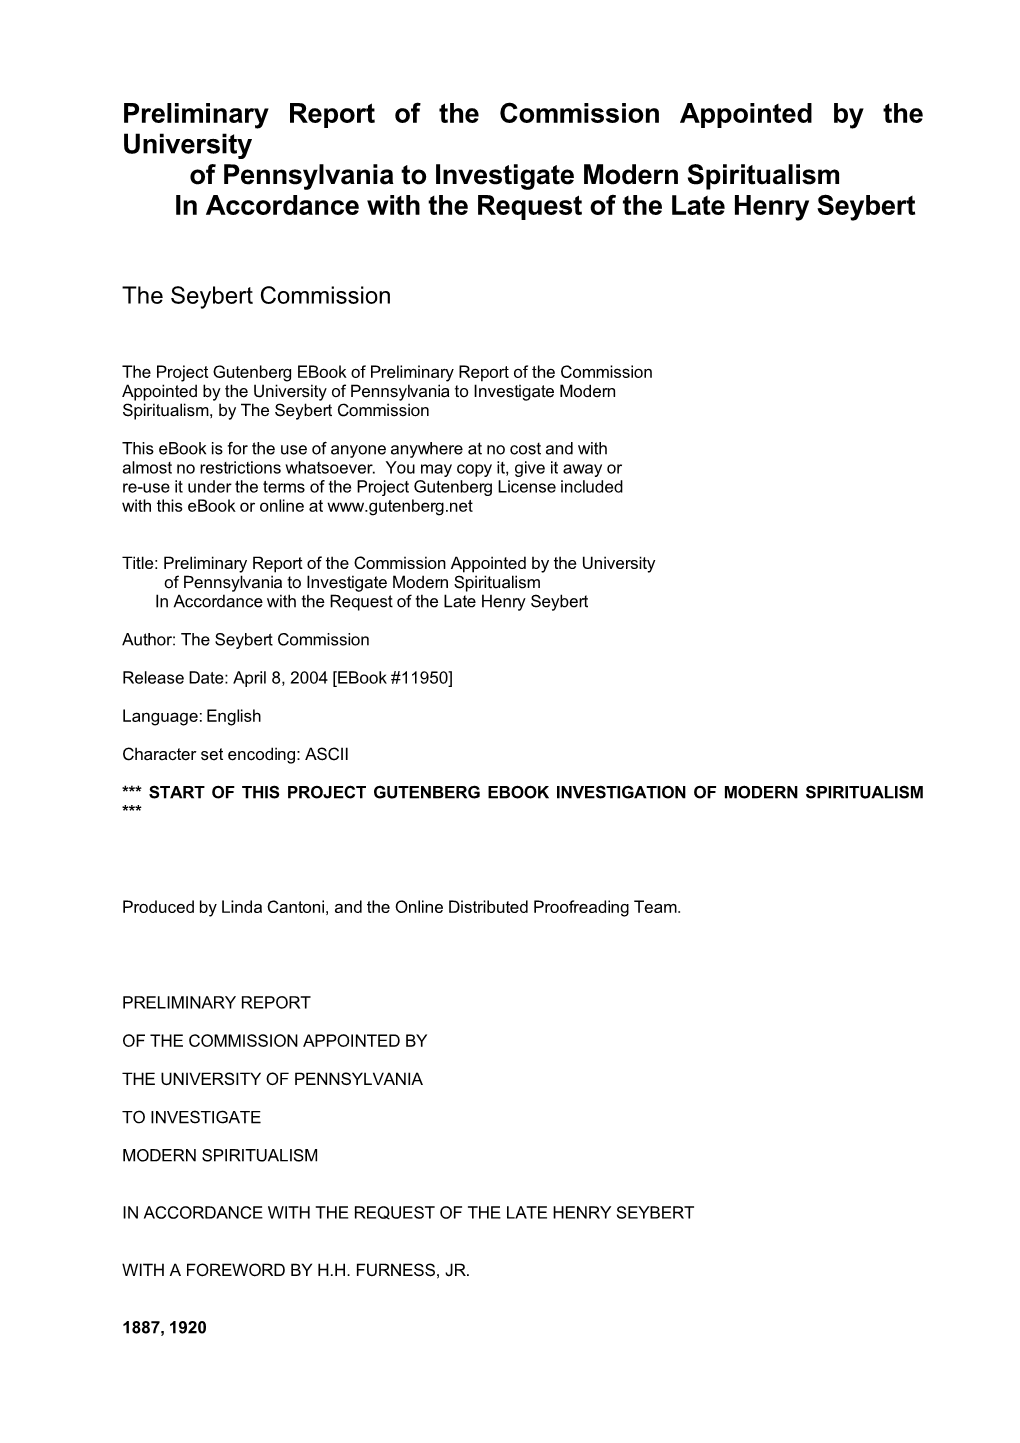 Preliminary Report of the Commission Appointed by the University of Pennsylvania to Investigate Modern Spiritualism in Accordanc